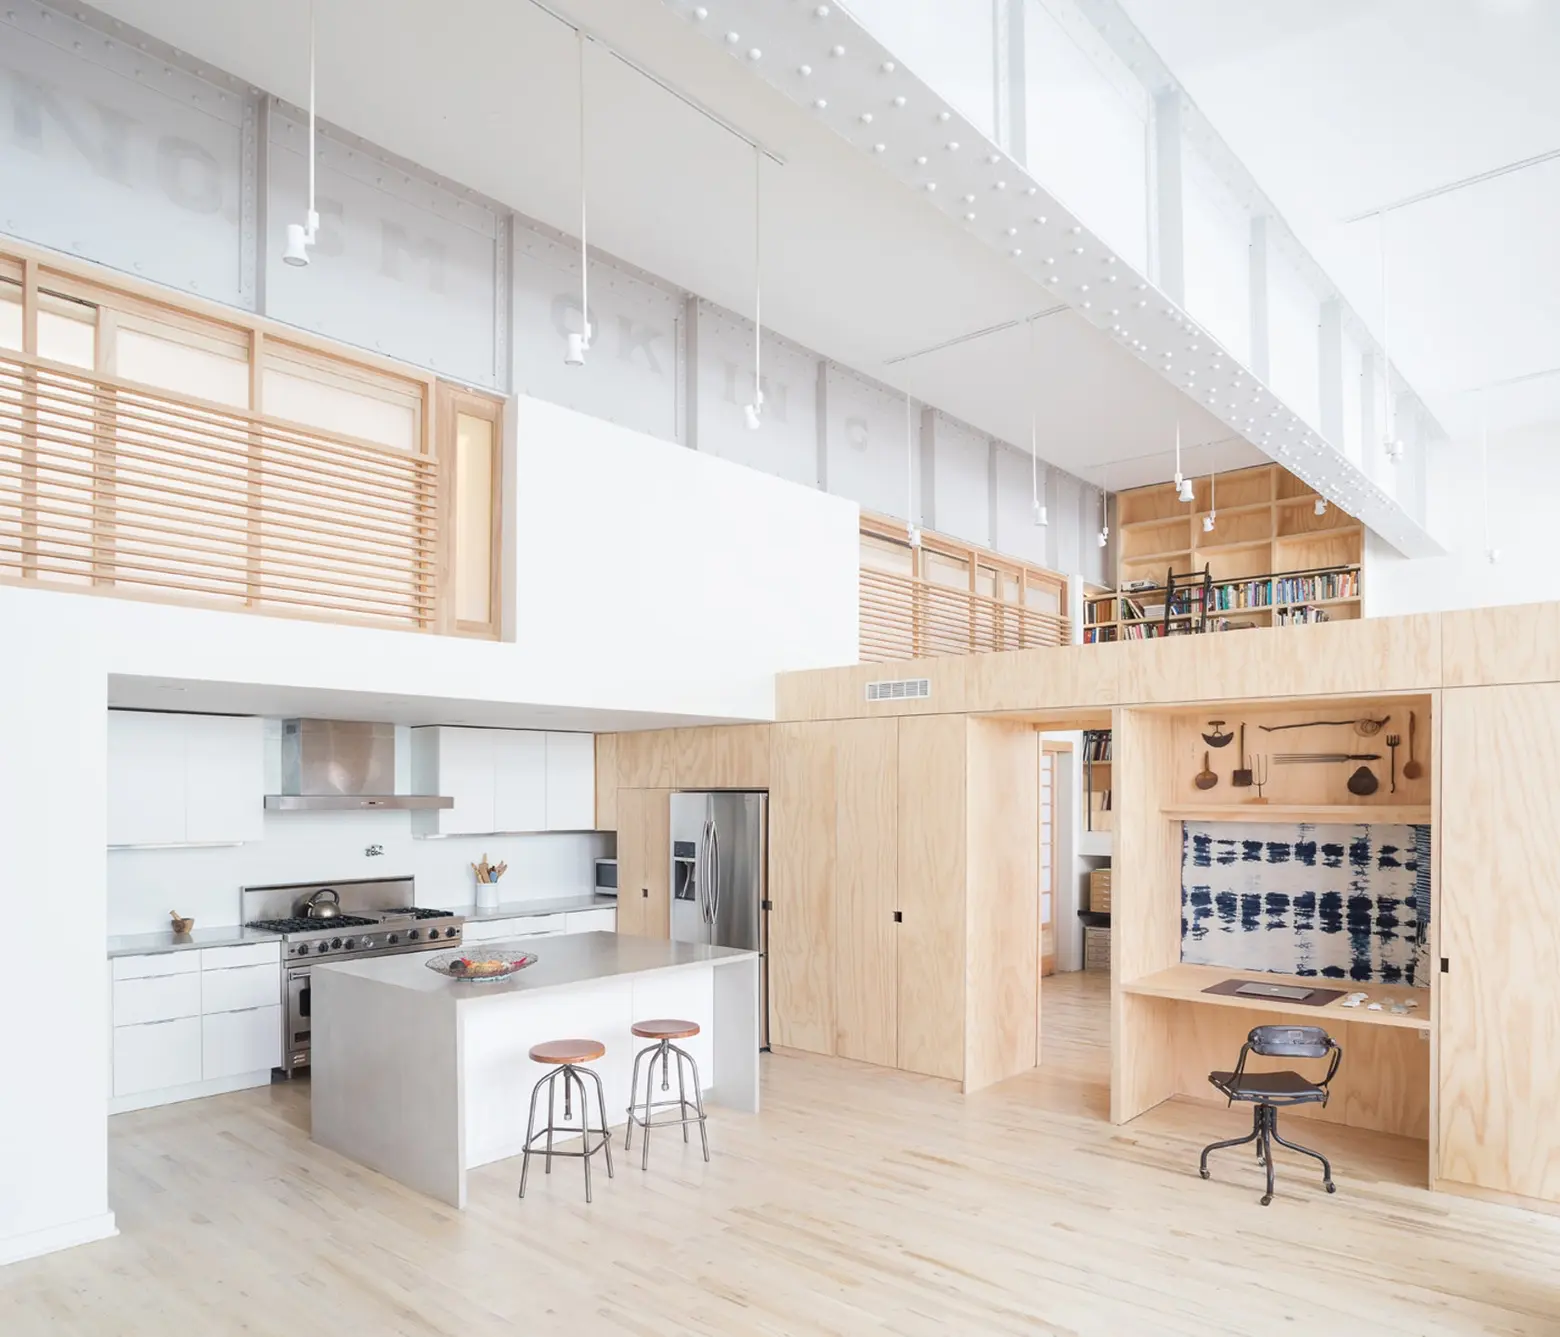 A former Wells Fargo horse stable in Jersey City gets converted into a modern plywood loft